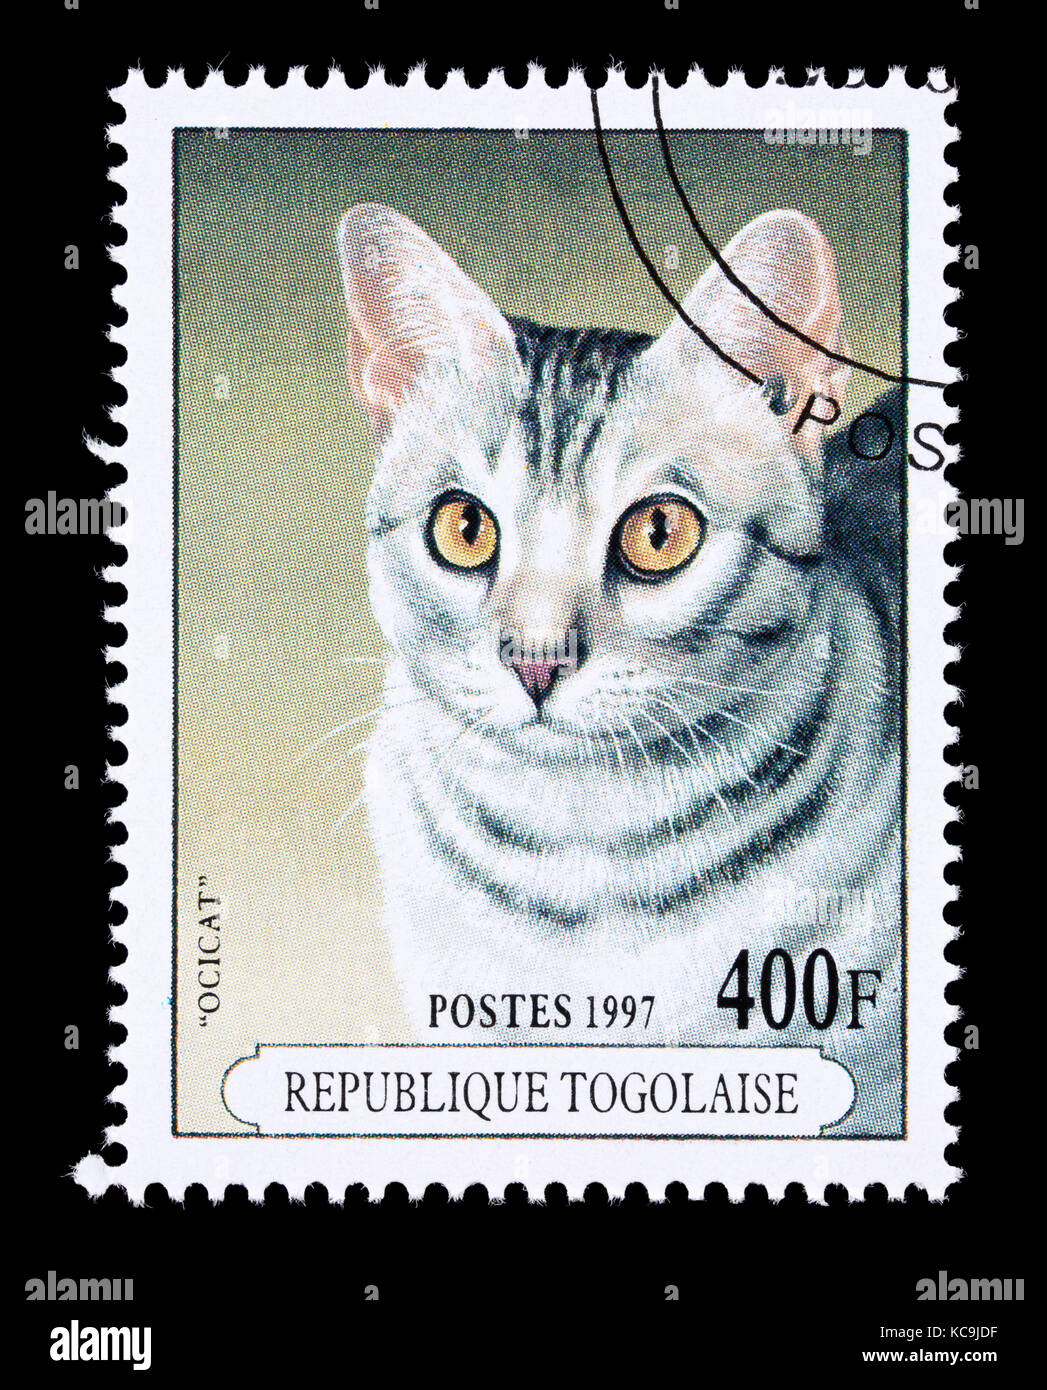 Postage stamp from Togo depicting a Ocicat breed of housecat. Stock Photo